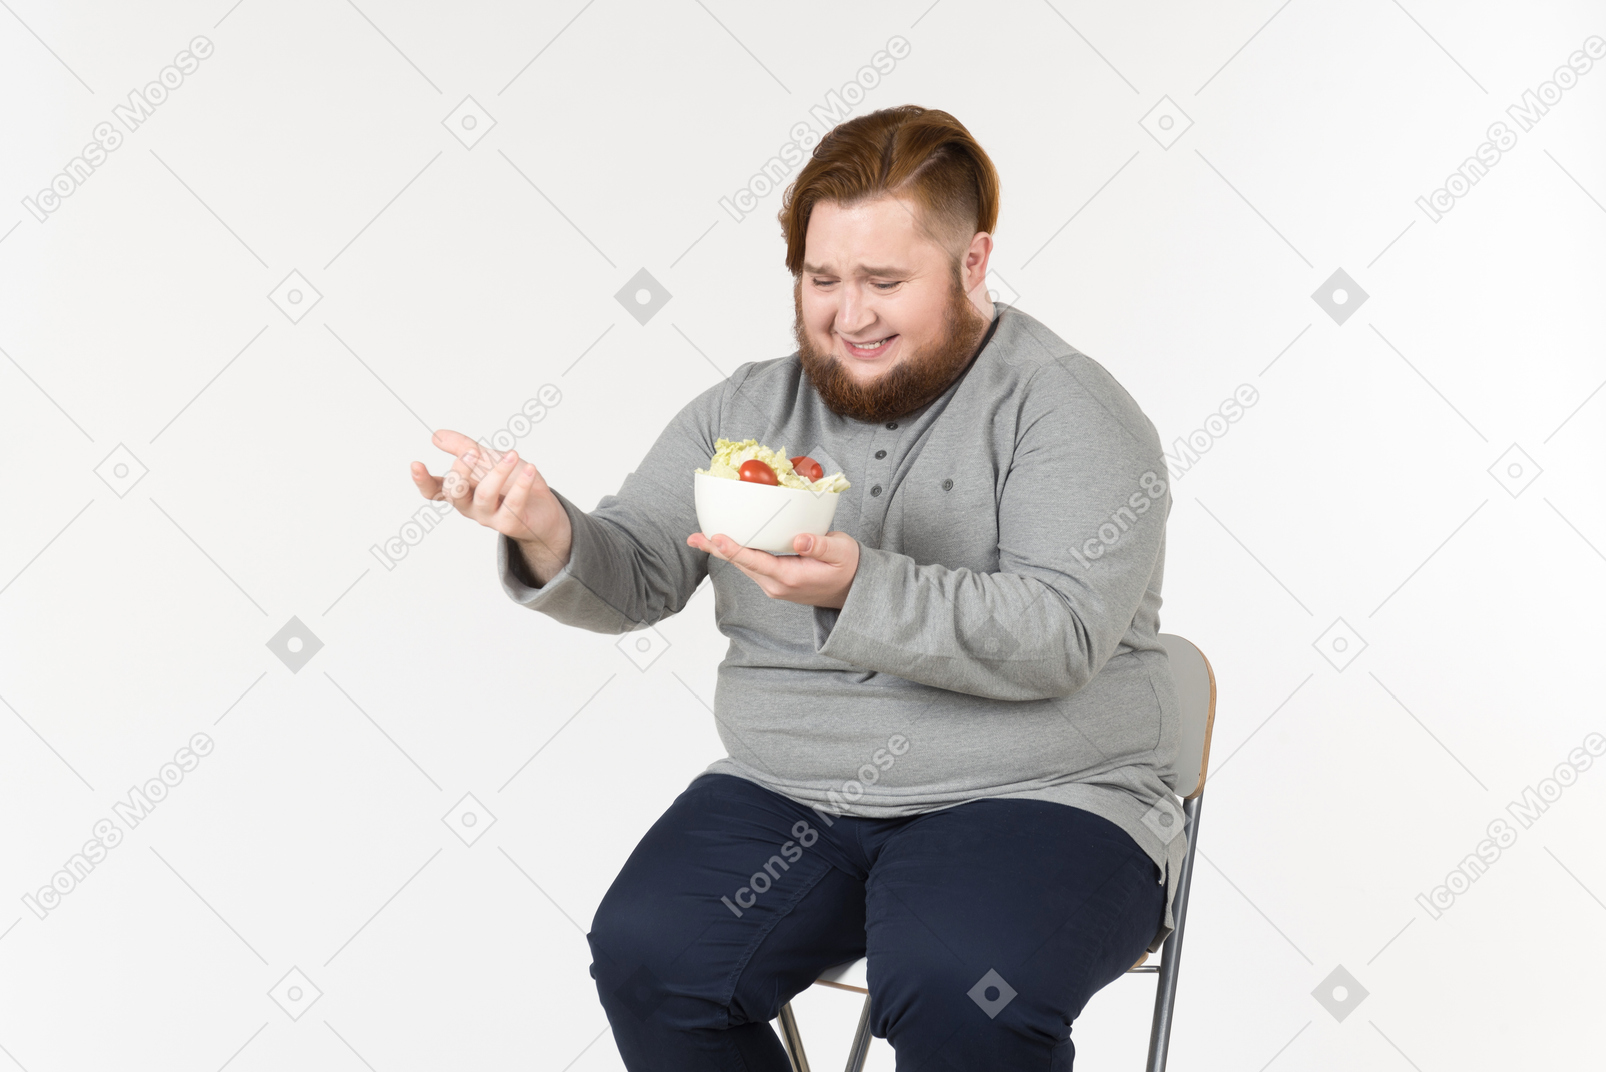 Laughing big bearded man sitting and holding salad